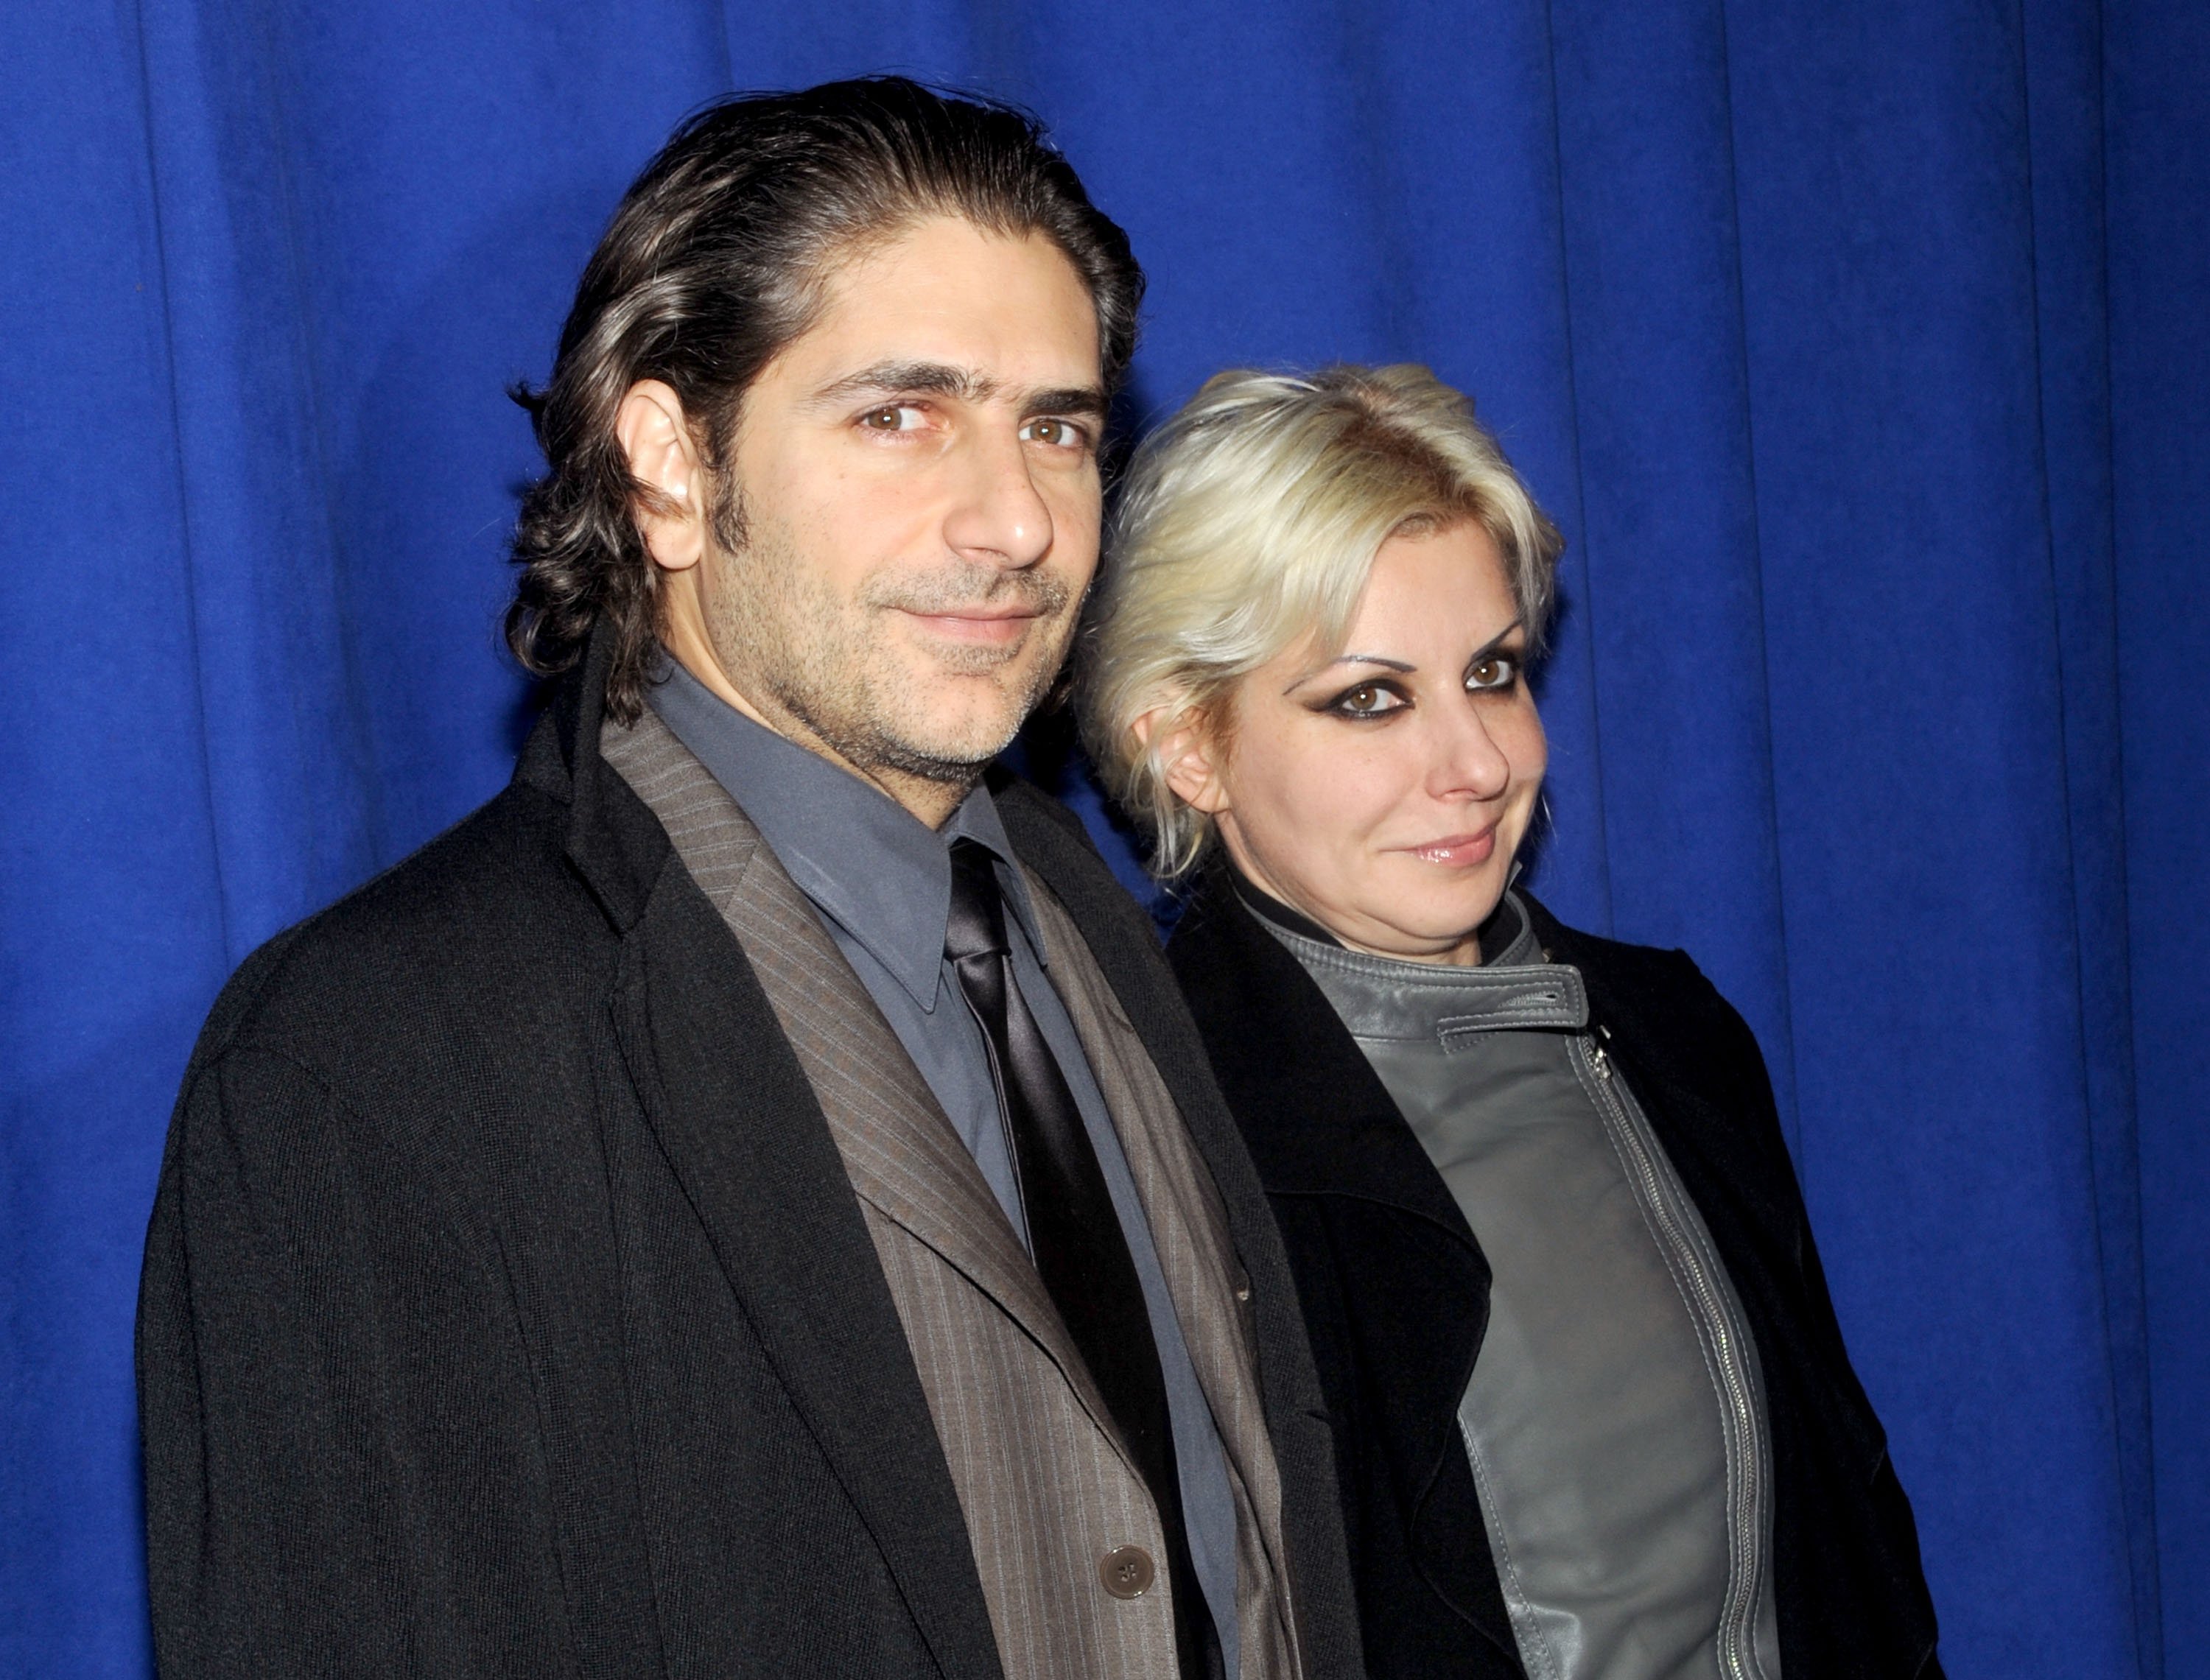 Michael Imperioli and his wife, Victoria Chlebowski attend the 7th annual Safe at Home gala at Pier Sixty at Chelsea Piers on November 13, 2009 in New York City. | Source: Getty Images